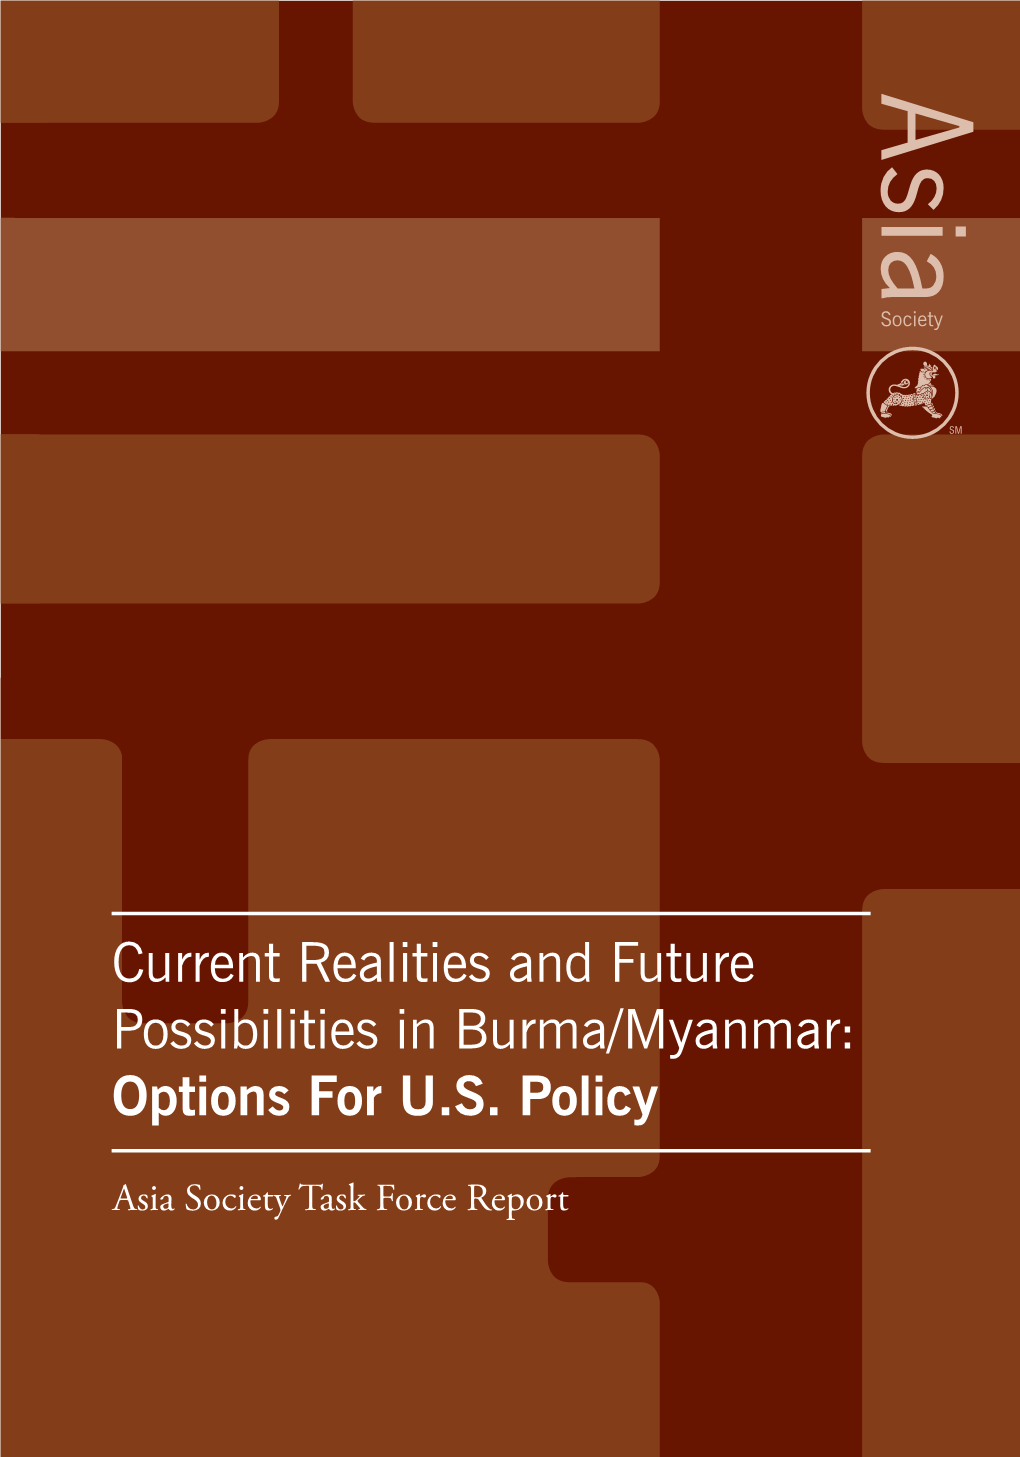 Current Realities and Future Possibilities in Burma/Myanmar: Options for U.S